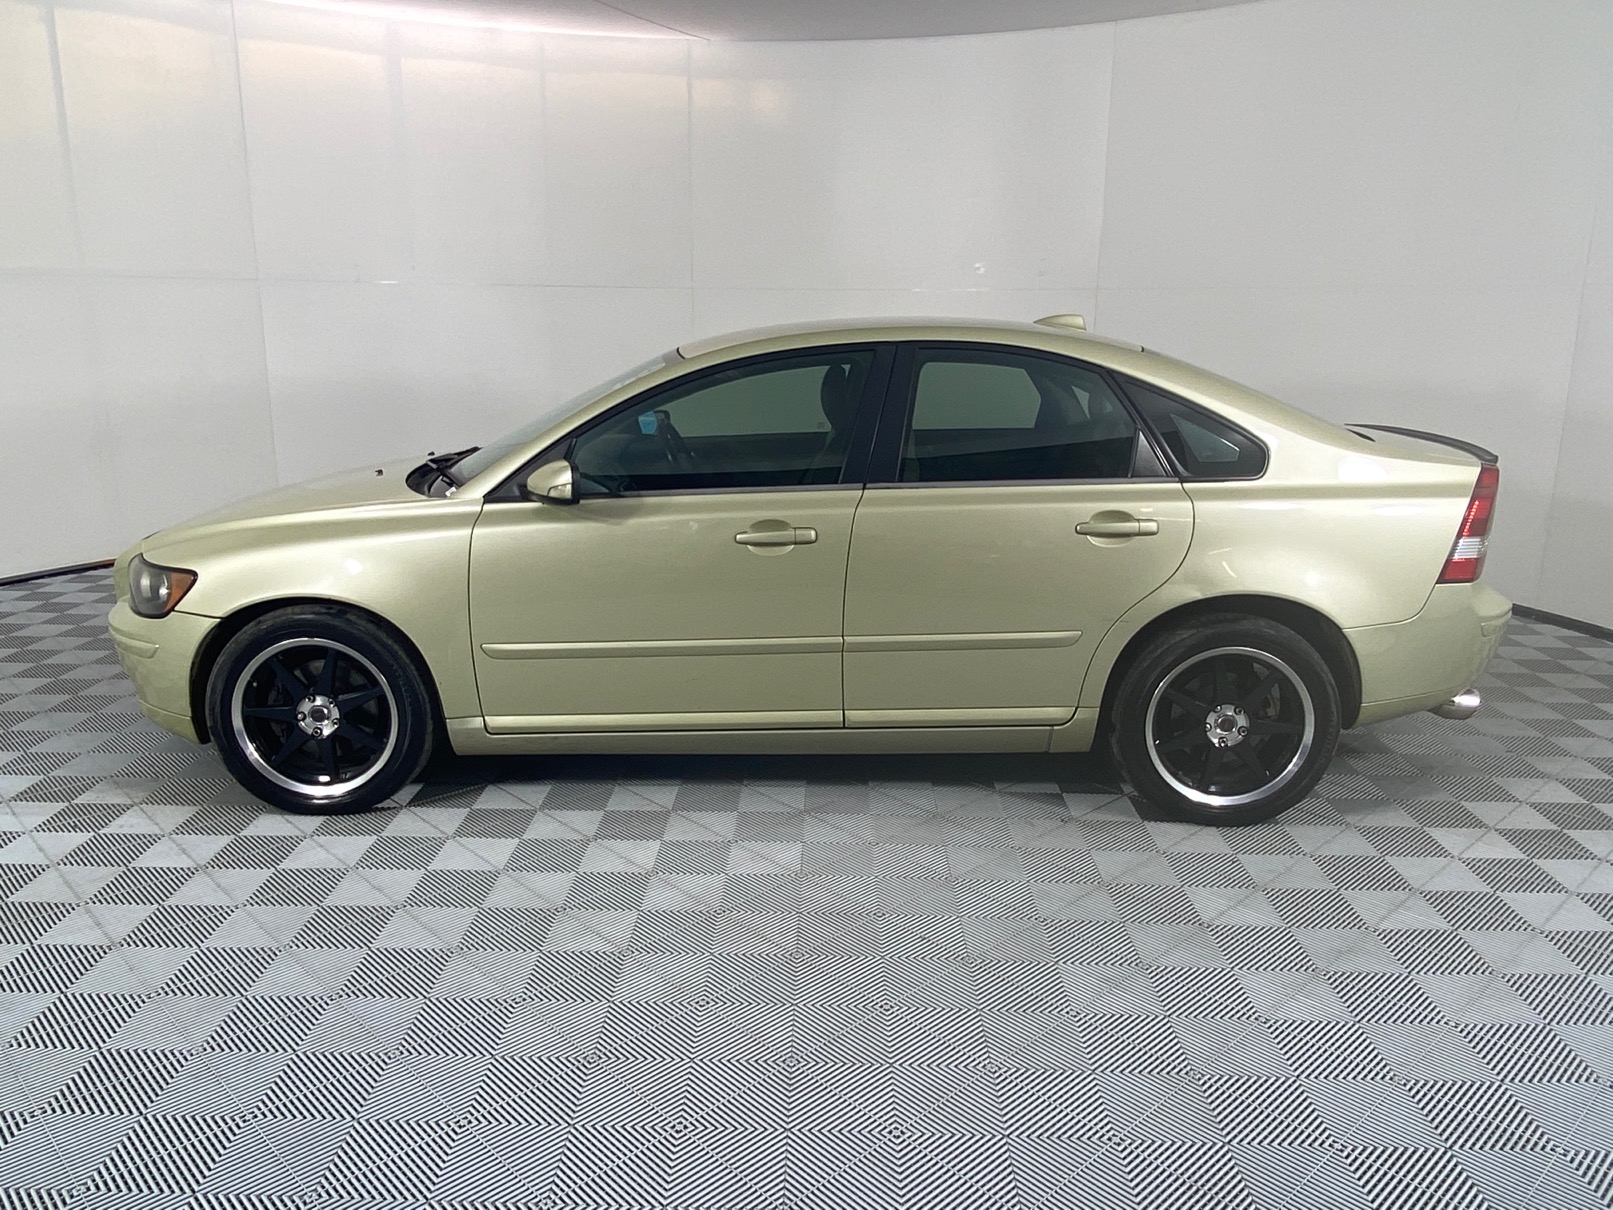 Used 2005 Volvo S40 2.0d for sale WeBuyCars